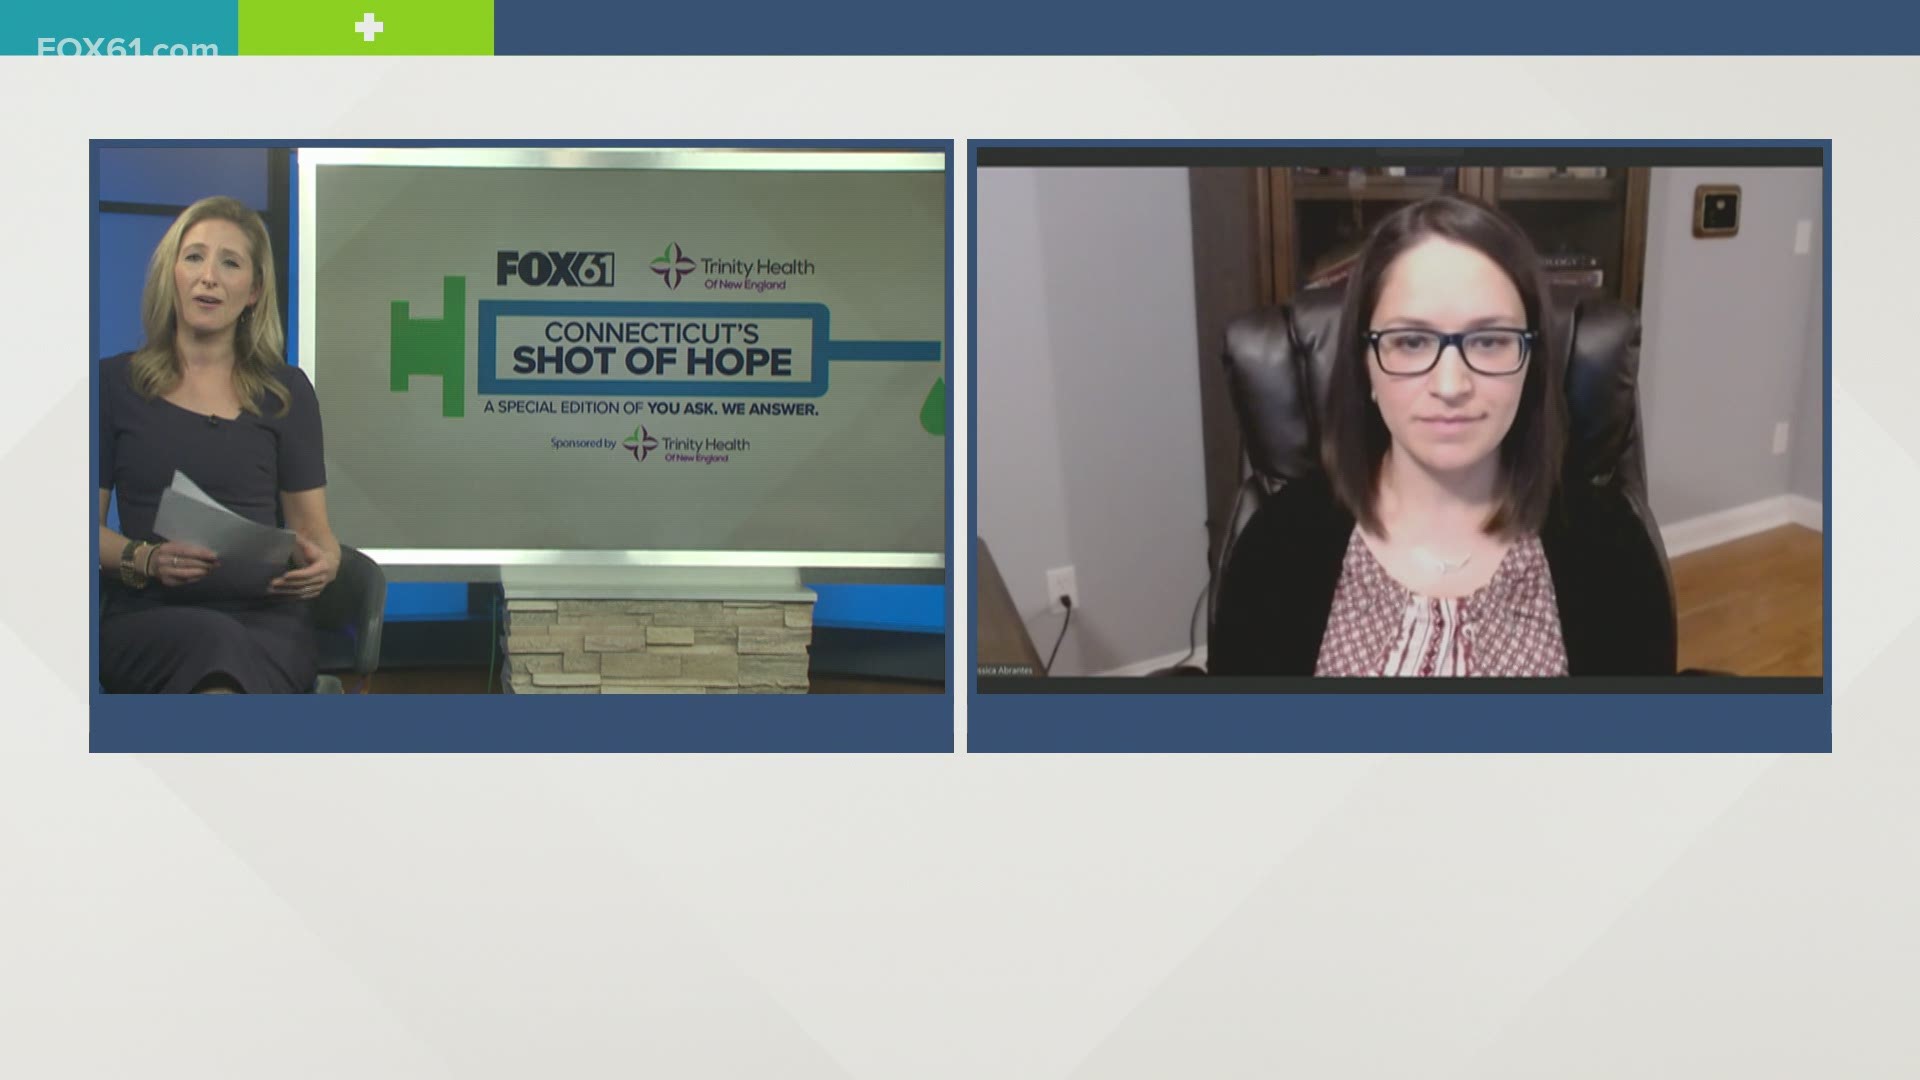 In this section, FOX61 asks the experts about fertility and the COVID-19 vaccine.